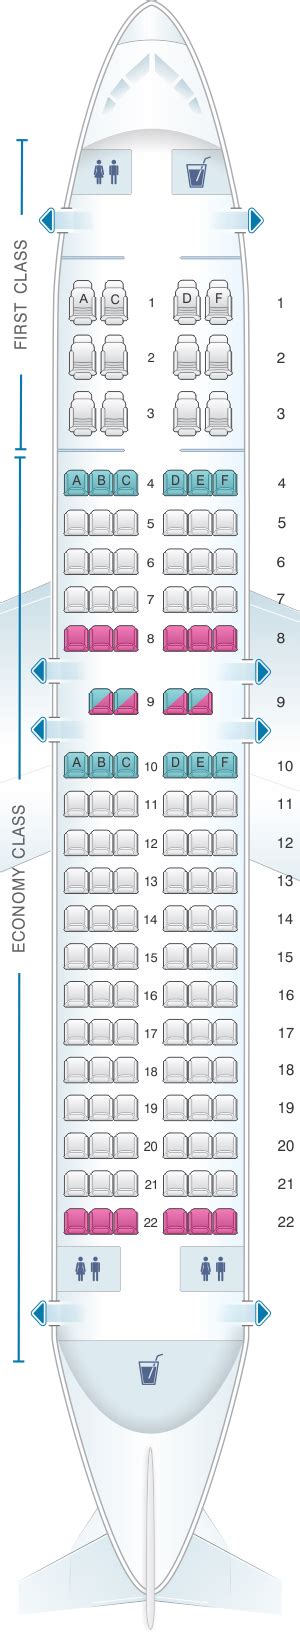 American Airlines Airbus A321 Seating Chart